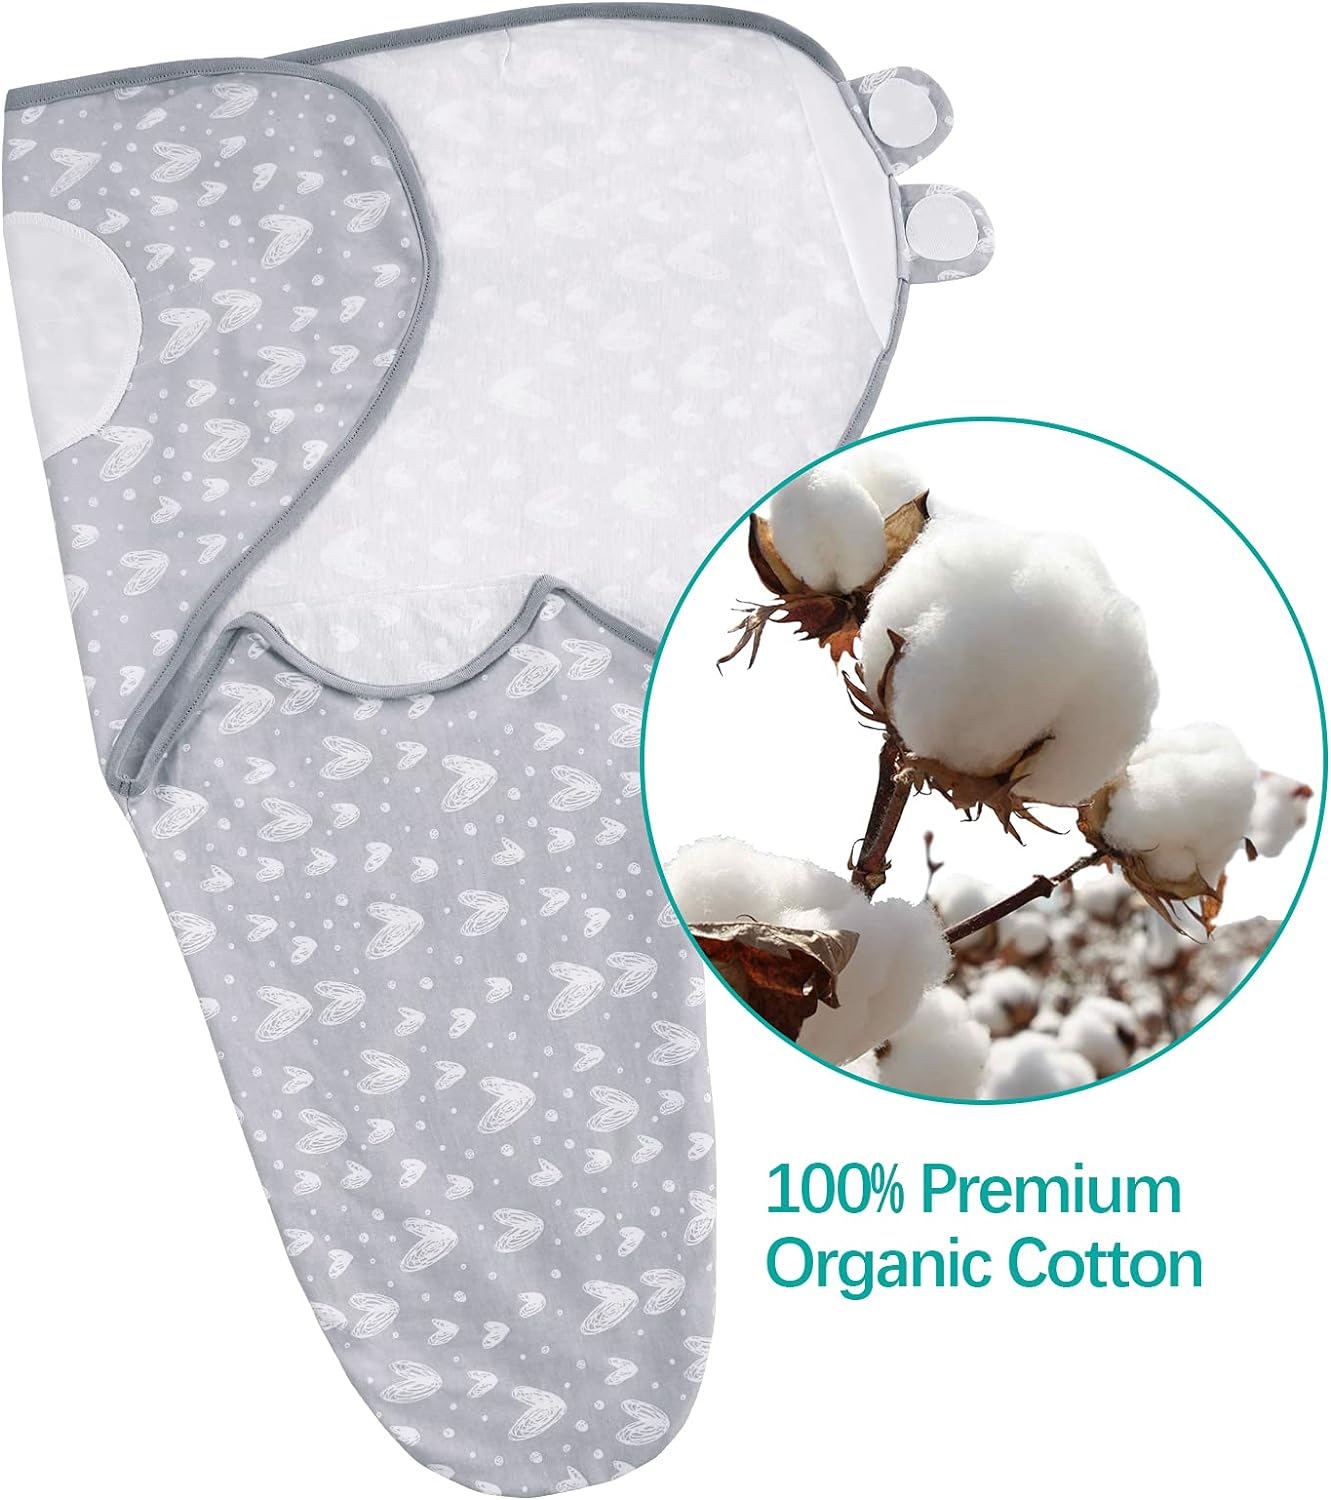 Baby Swaddles - for Newborn 0-3 Months, 4 Pack, 100% Organic Cotton, Grey Heart & White Star